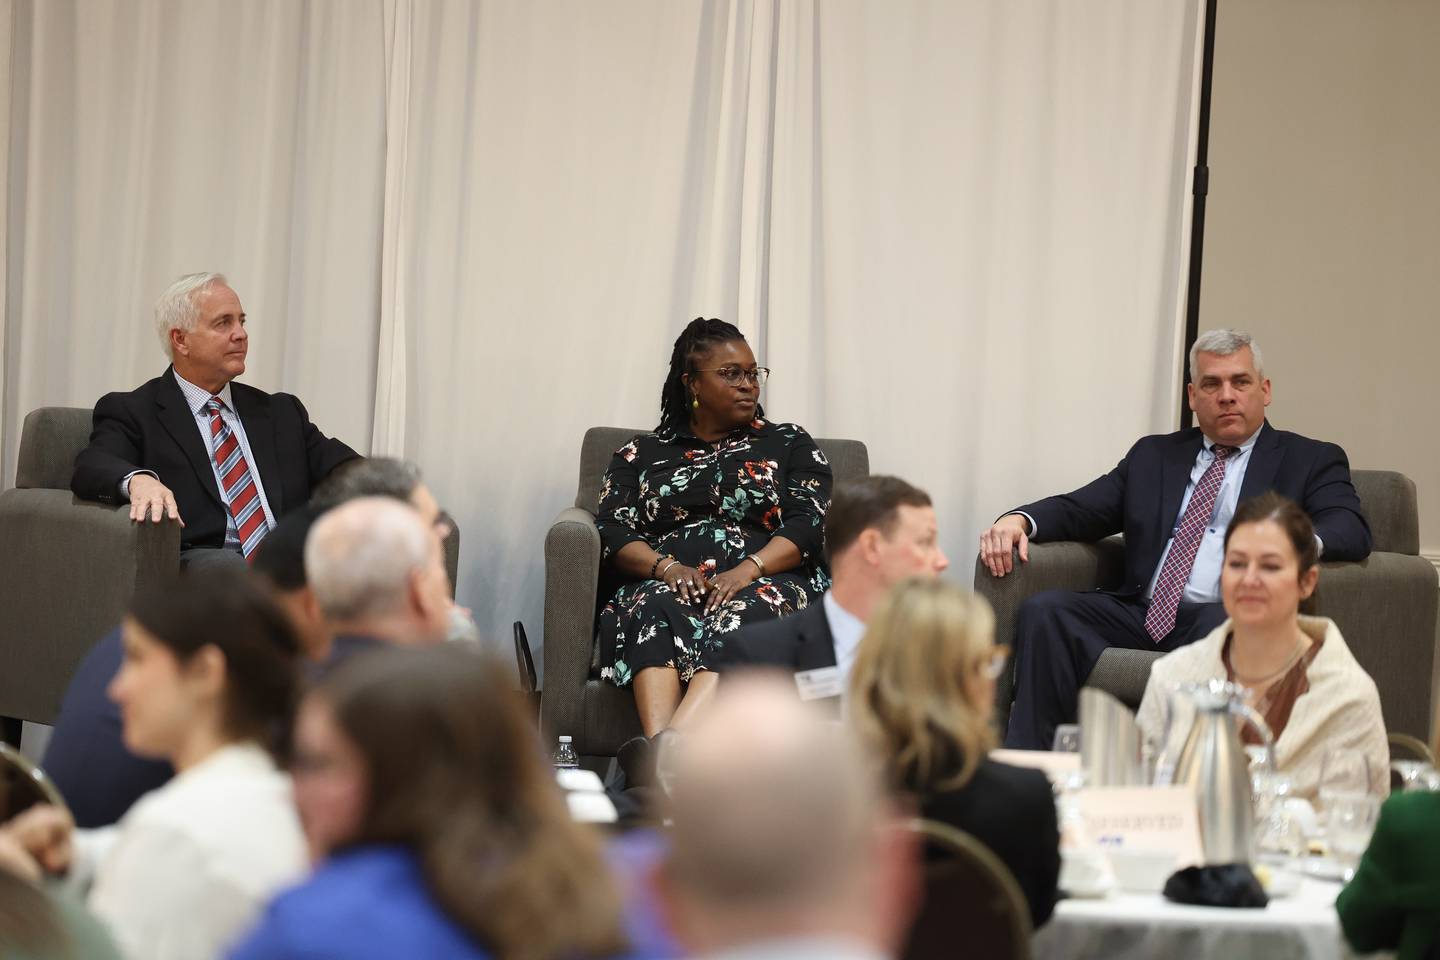 Mayor Bob O’Dekirk (left), Terry D’Arcy and Tycee Bell are giving a question by the moderators to answer at the Joliet Mayoral Candidate Panel luncheon hosted by the Joliet Region Chamber of Commerce on Wednesday, March 8th, 2023 at the Clarion Hotel & Convention Center Joliet.